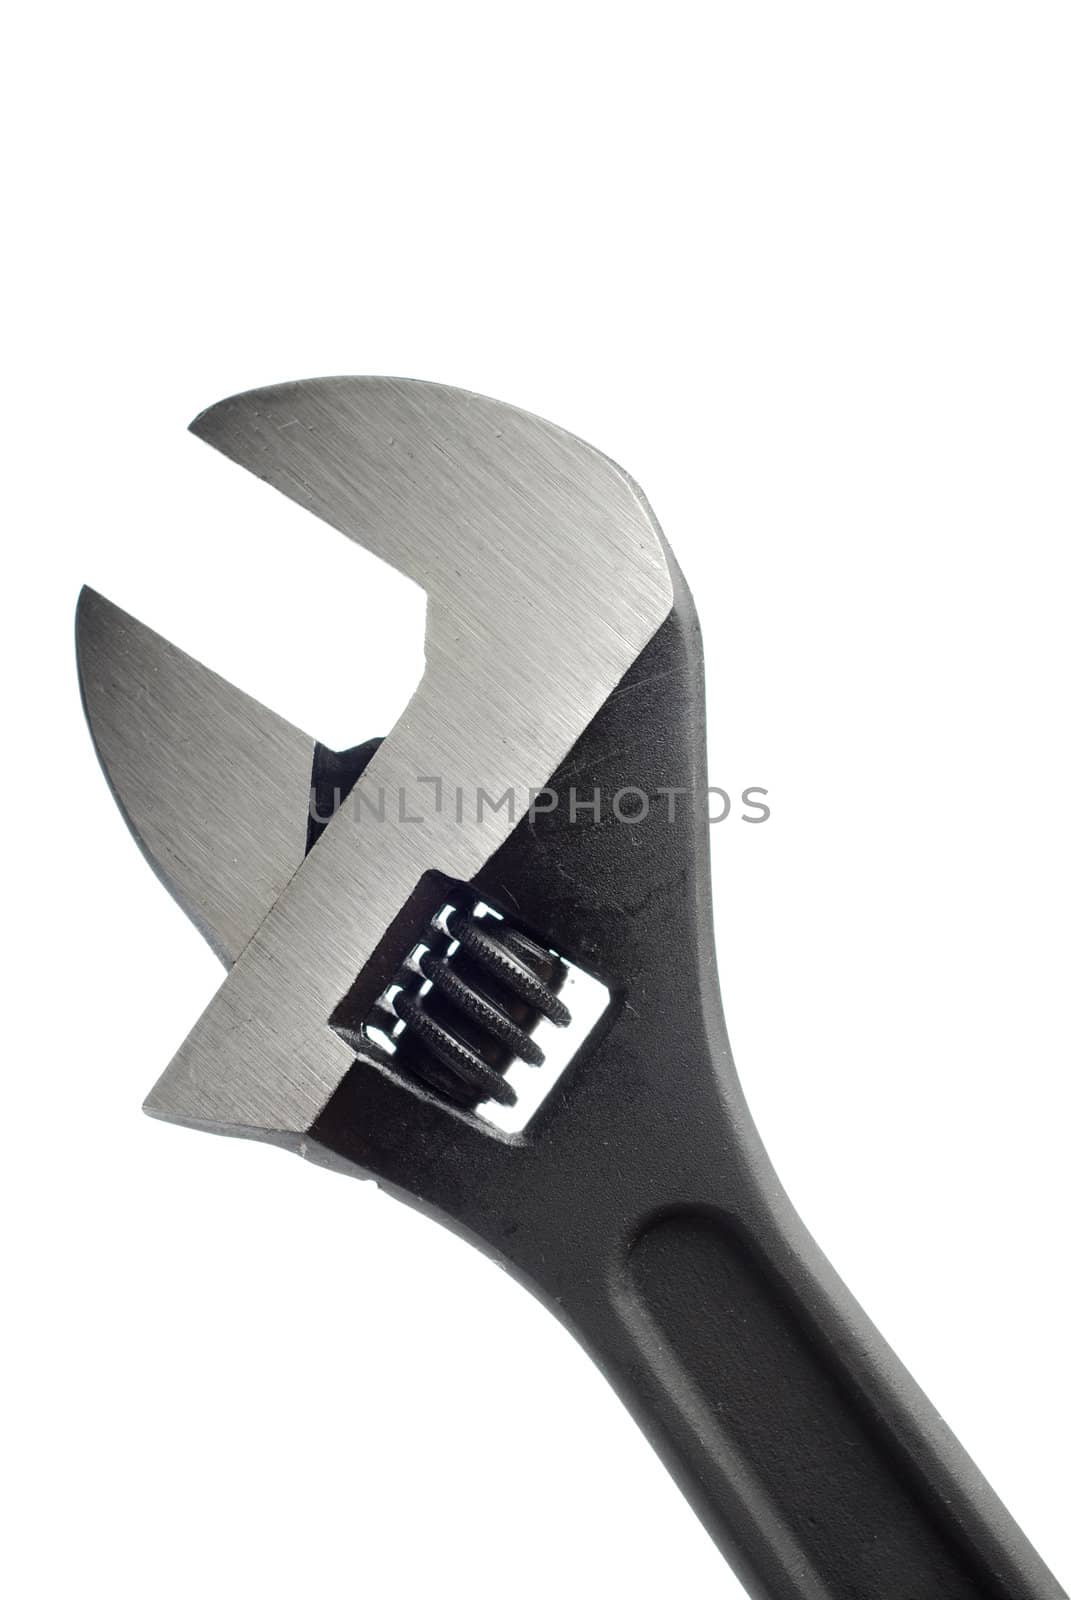 Black and steel wrench isolated on white background